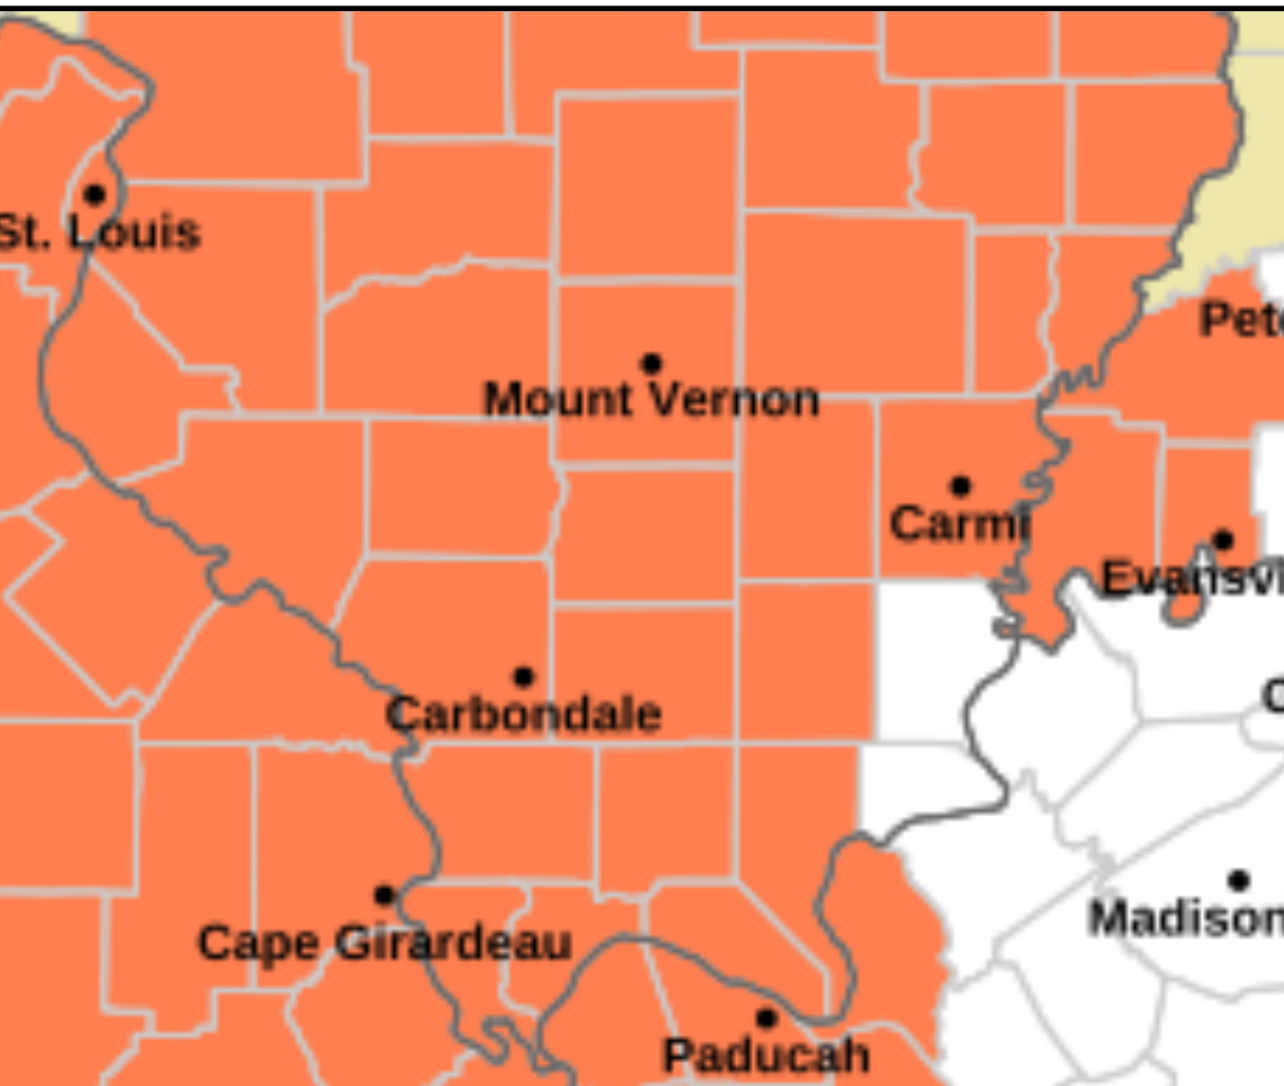 Heat Advisory Issued for Much of Southern Illinois Tuesday